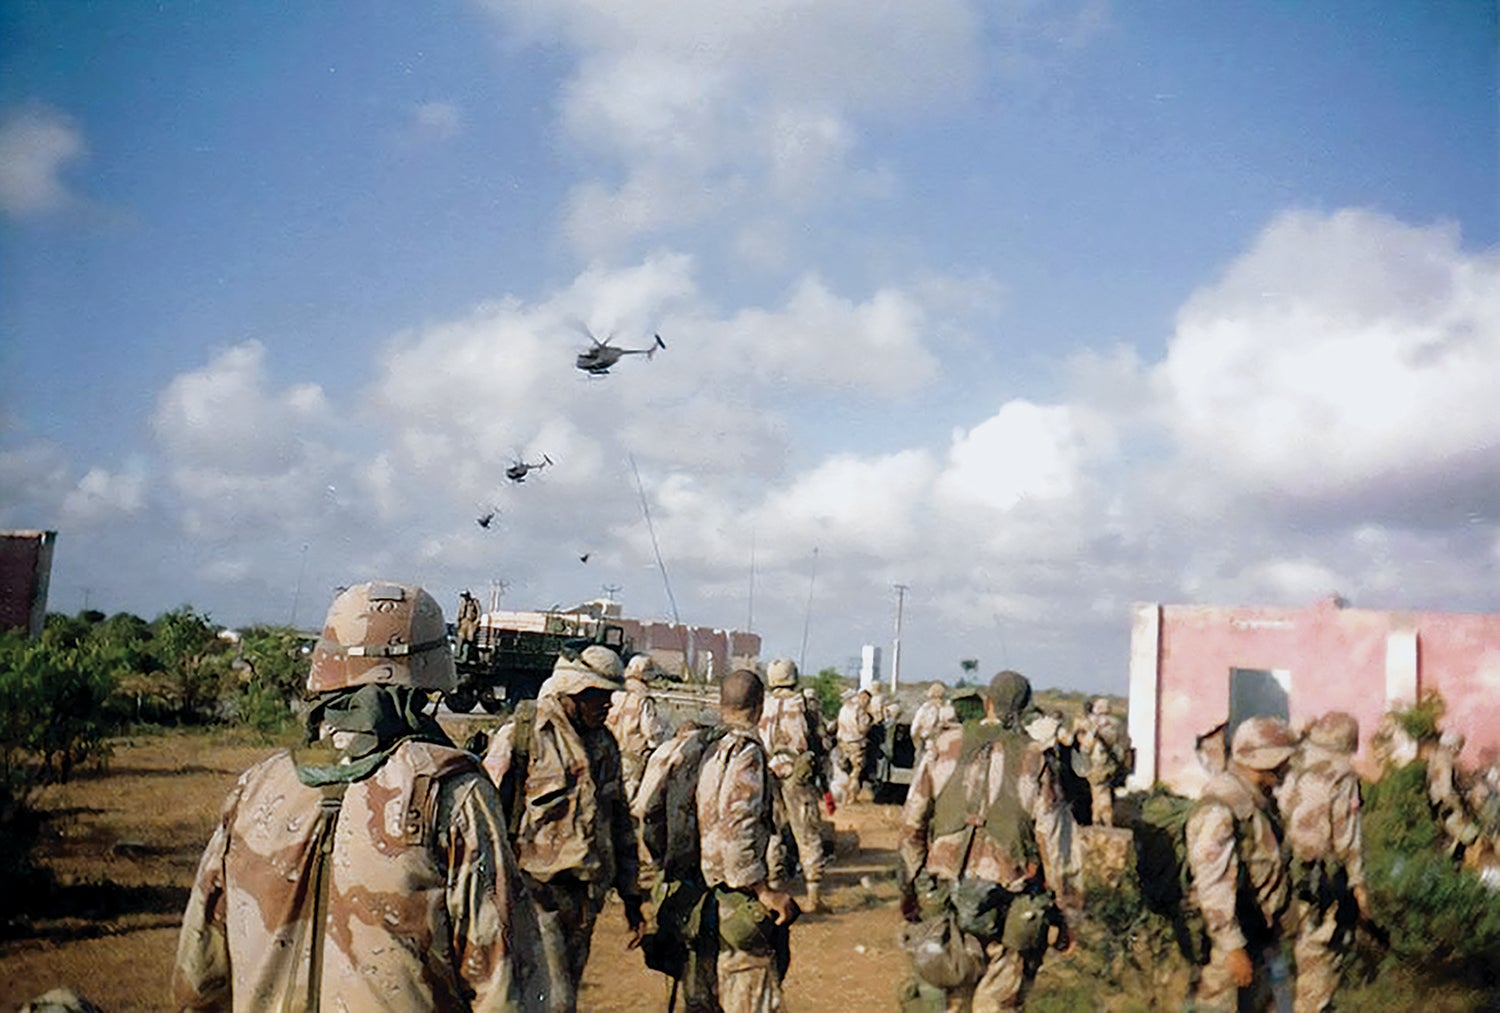 Soldiers with the 10th Mountain Division’s 2nd Battalion, 14th Infantry Regiment, watch U.S. helicopter activity on the first day of the Battle of Mogadishu, Oct. 3, 1993. (Credit: U.S. Army)